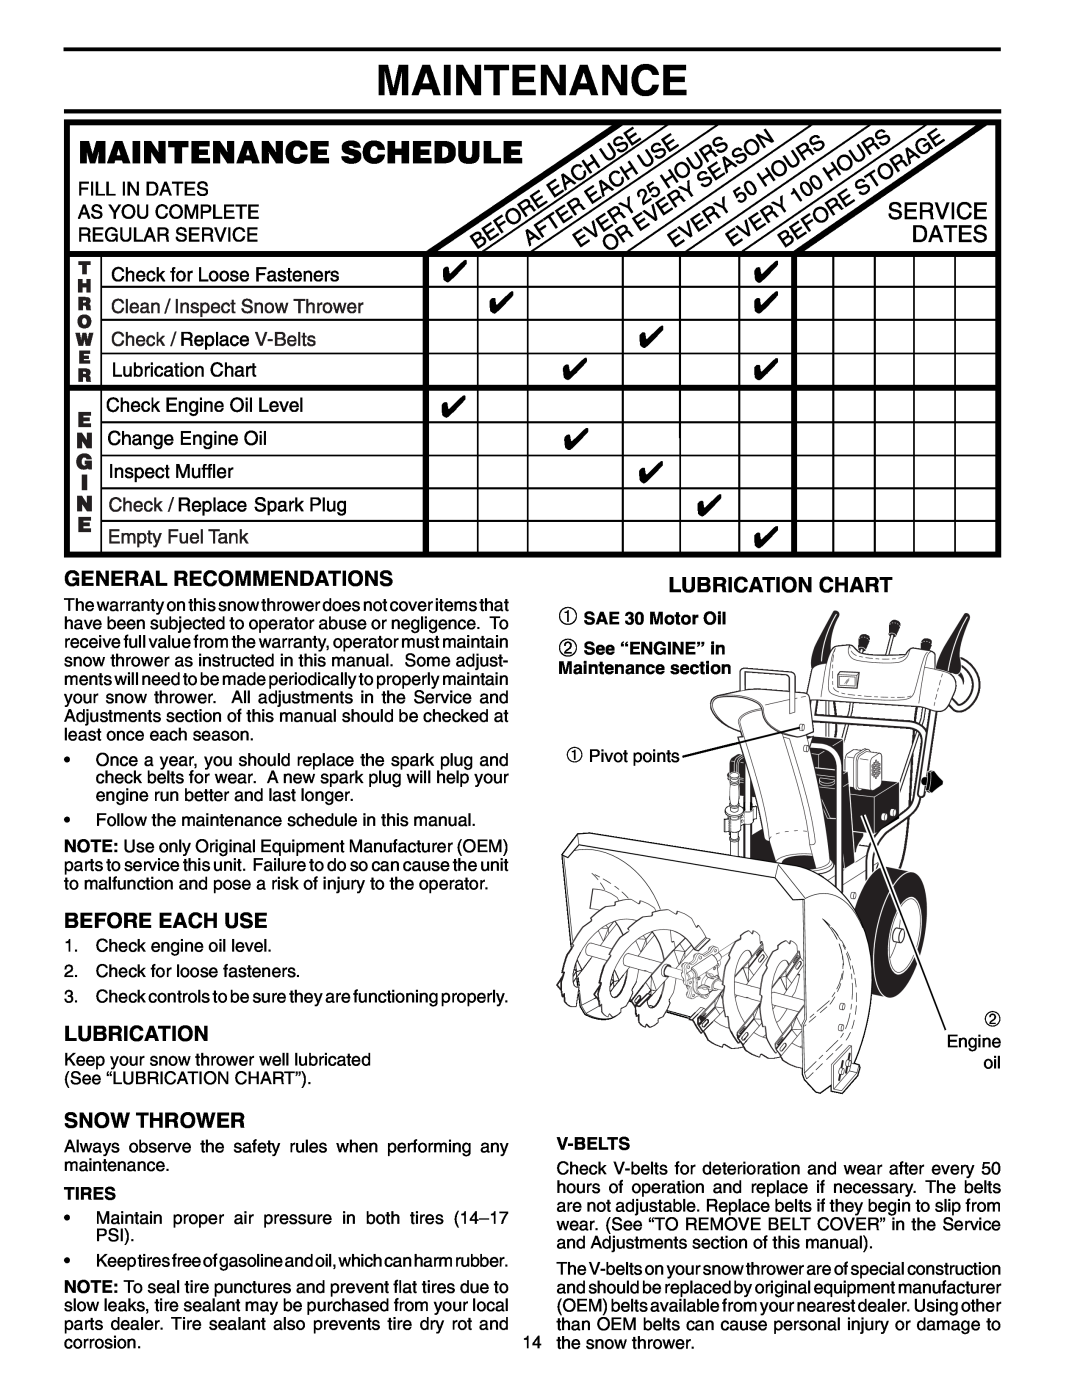 Poulan 96192000400, 199342 Maintenance, General Recommendations, Before Each Use, Lubrication Chart, Snow Thrower 